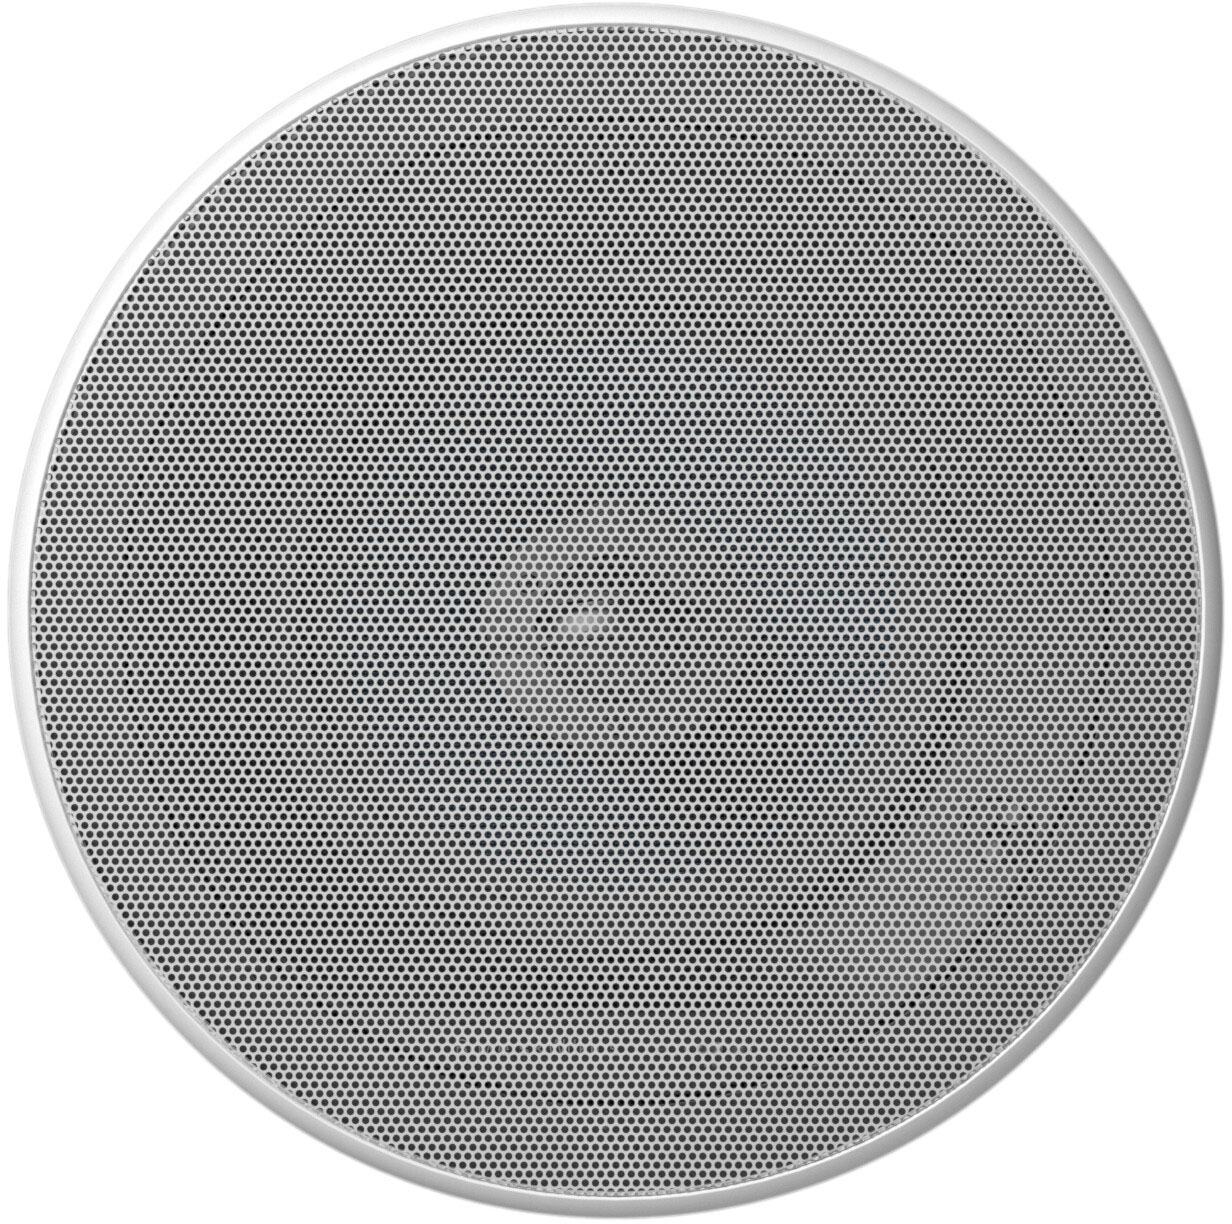 Angle View: Bowers & Wilkins - CI600 Series 663 Reduced Depth 6" In-Ceiling Speakers (Pair) - Paintable White